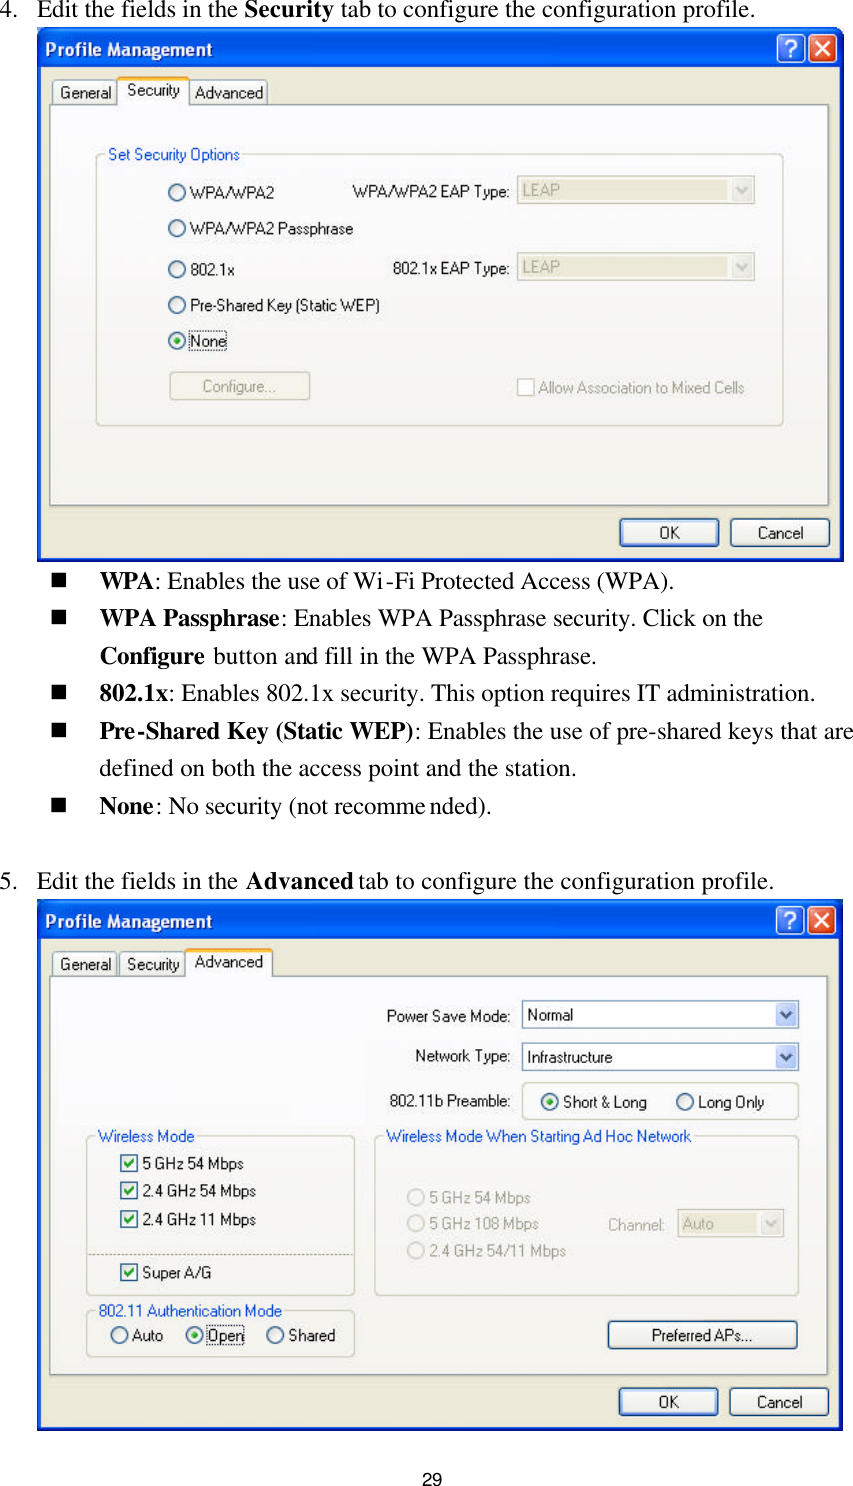 29 4. Edit the fields in the Security tab to configure the configuration profile.  n WPA: Enables the use of Wi-Fi Protected Access (WPA). n WPA Passphrase: Enables WPA Passphrase security. Click on the Configure button and fill in the WPA Passphrase. n 802.1x: Enables 802.1x security. This option requires IT administration. n Pre-Shared Key (Static WEP): Enables the use of pre-shared keys that are defined on both the access point and the station. n None: No security (not recommended).  5. Edit the fields in the Advanced tab to configure the configuration profile.   